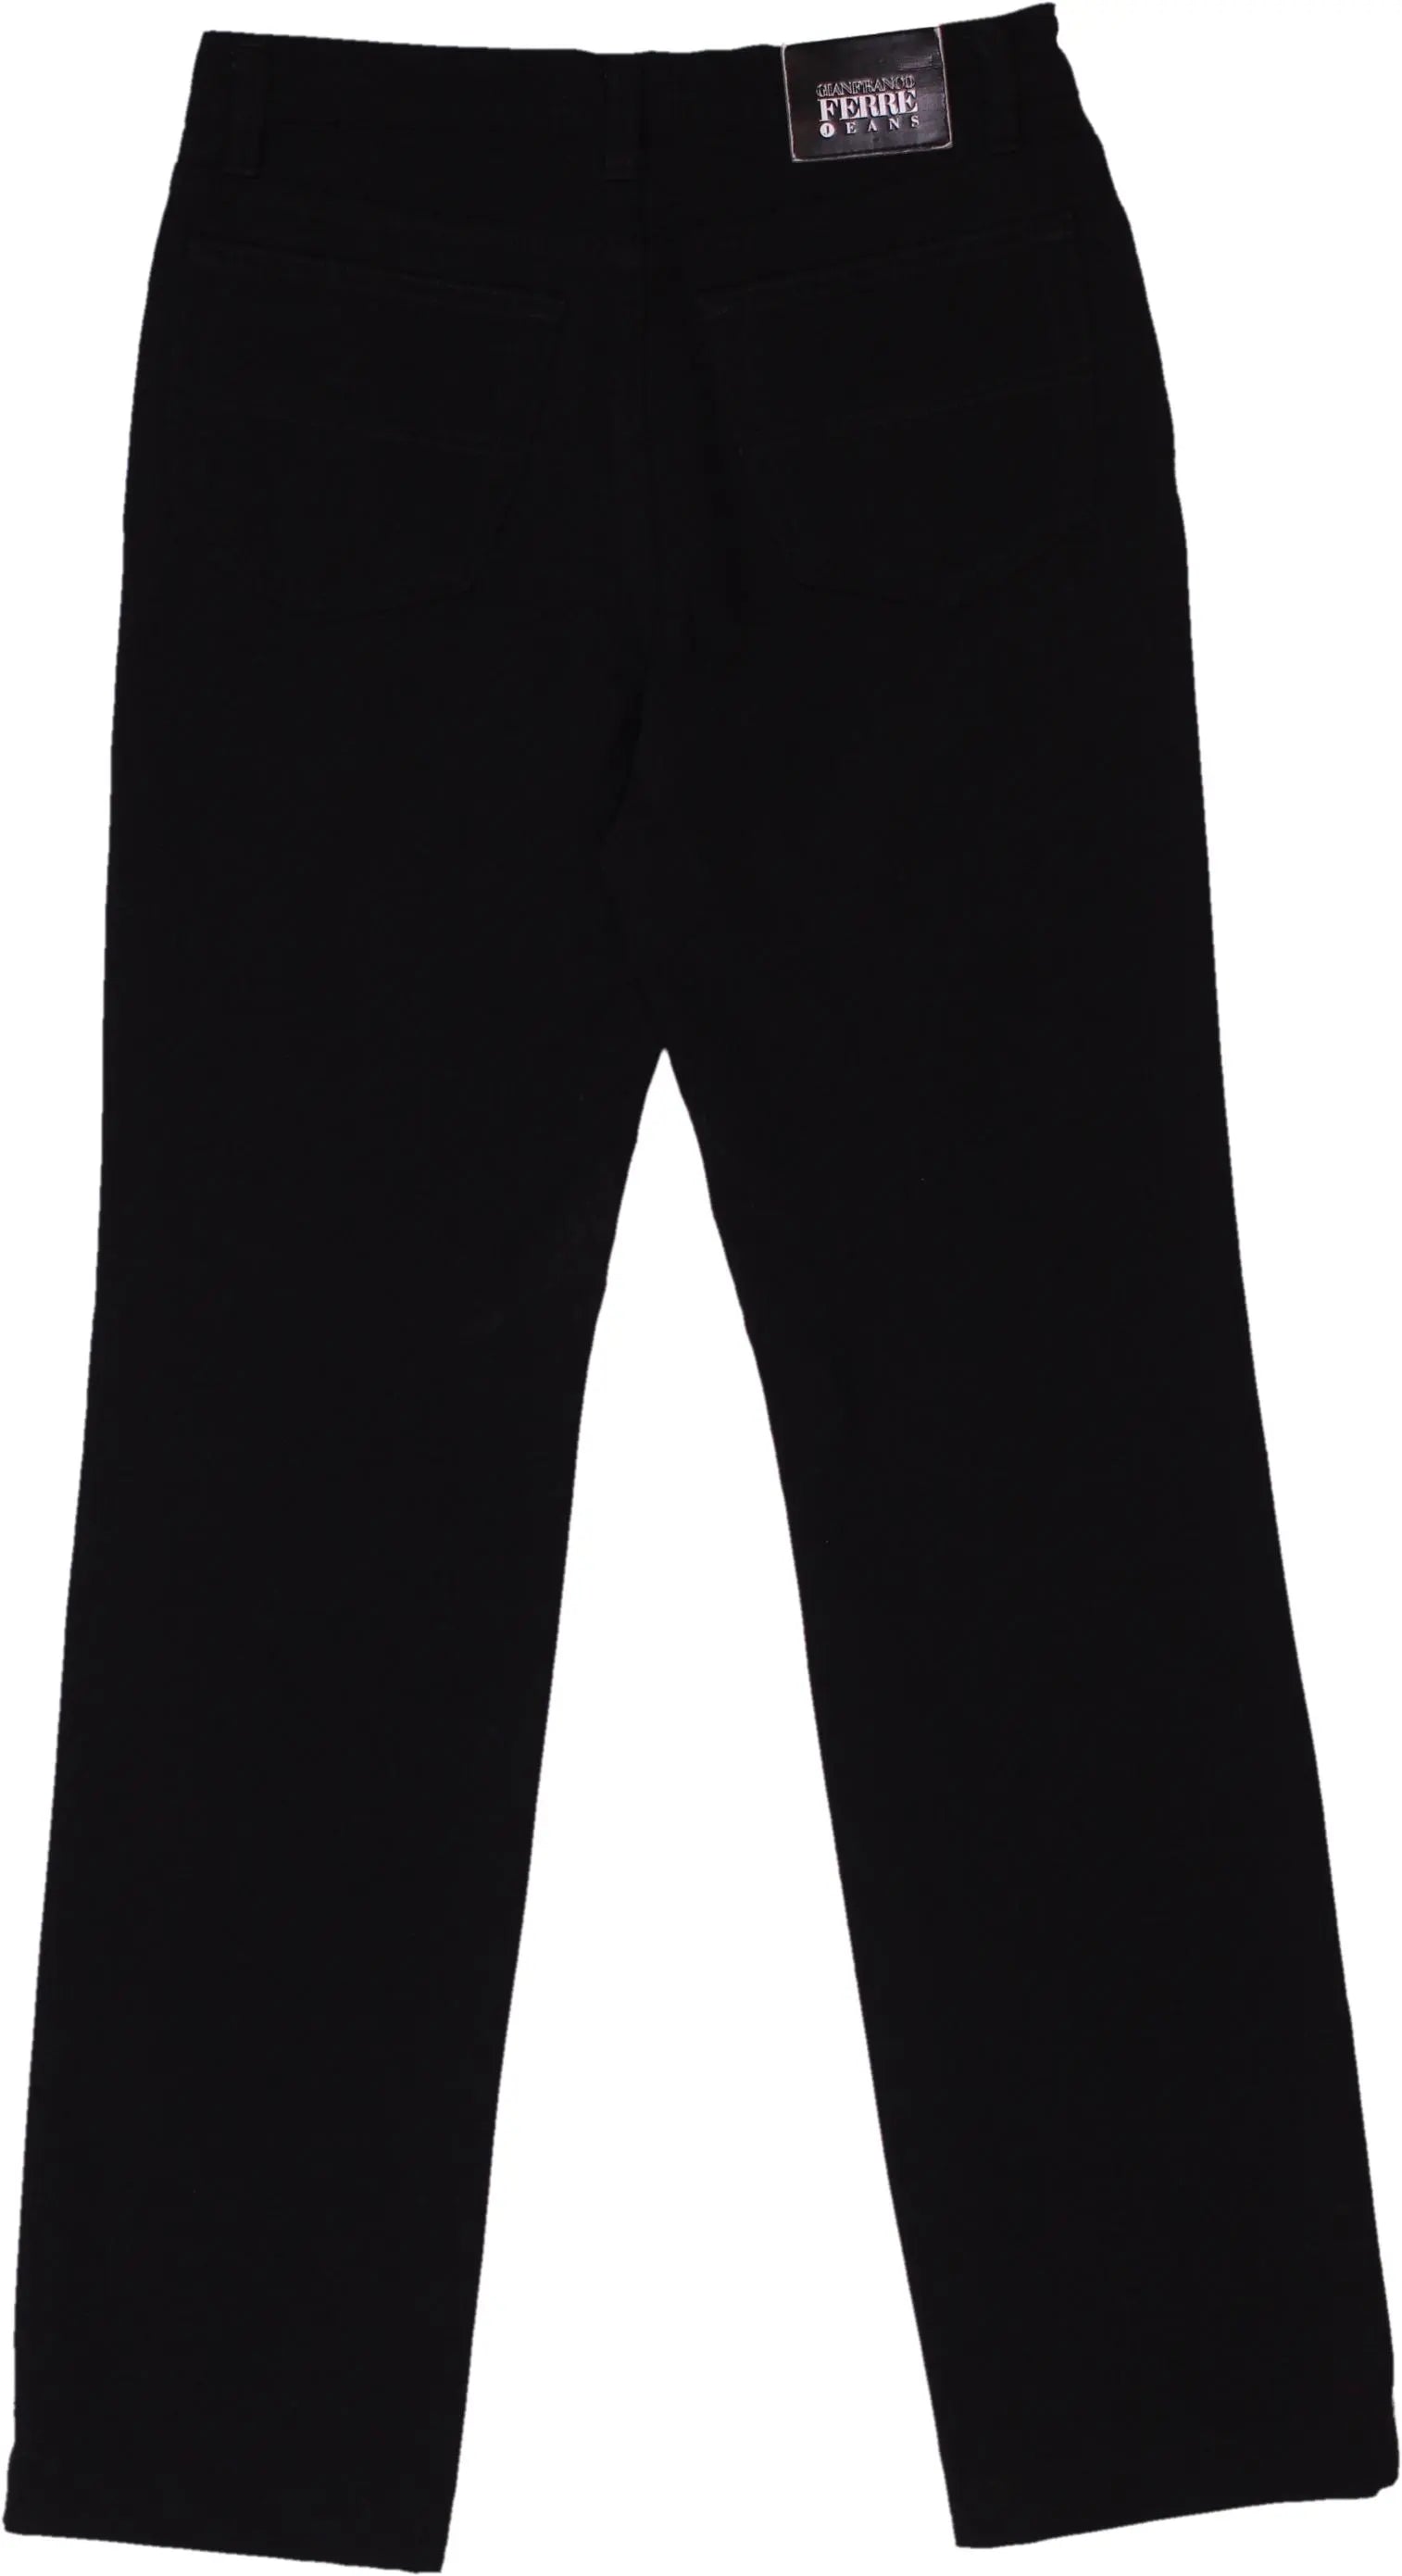 Gianfranco Ferre - Black Pants by Gianfranco Ferre- ThriftTale.com - Vintage and second handclothing